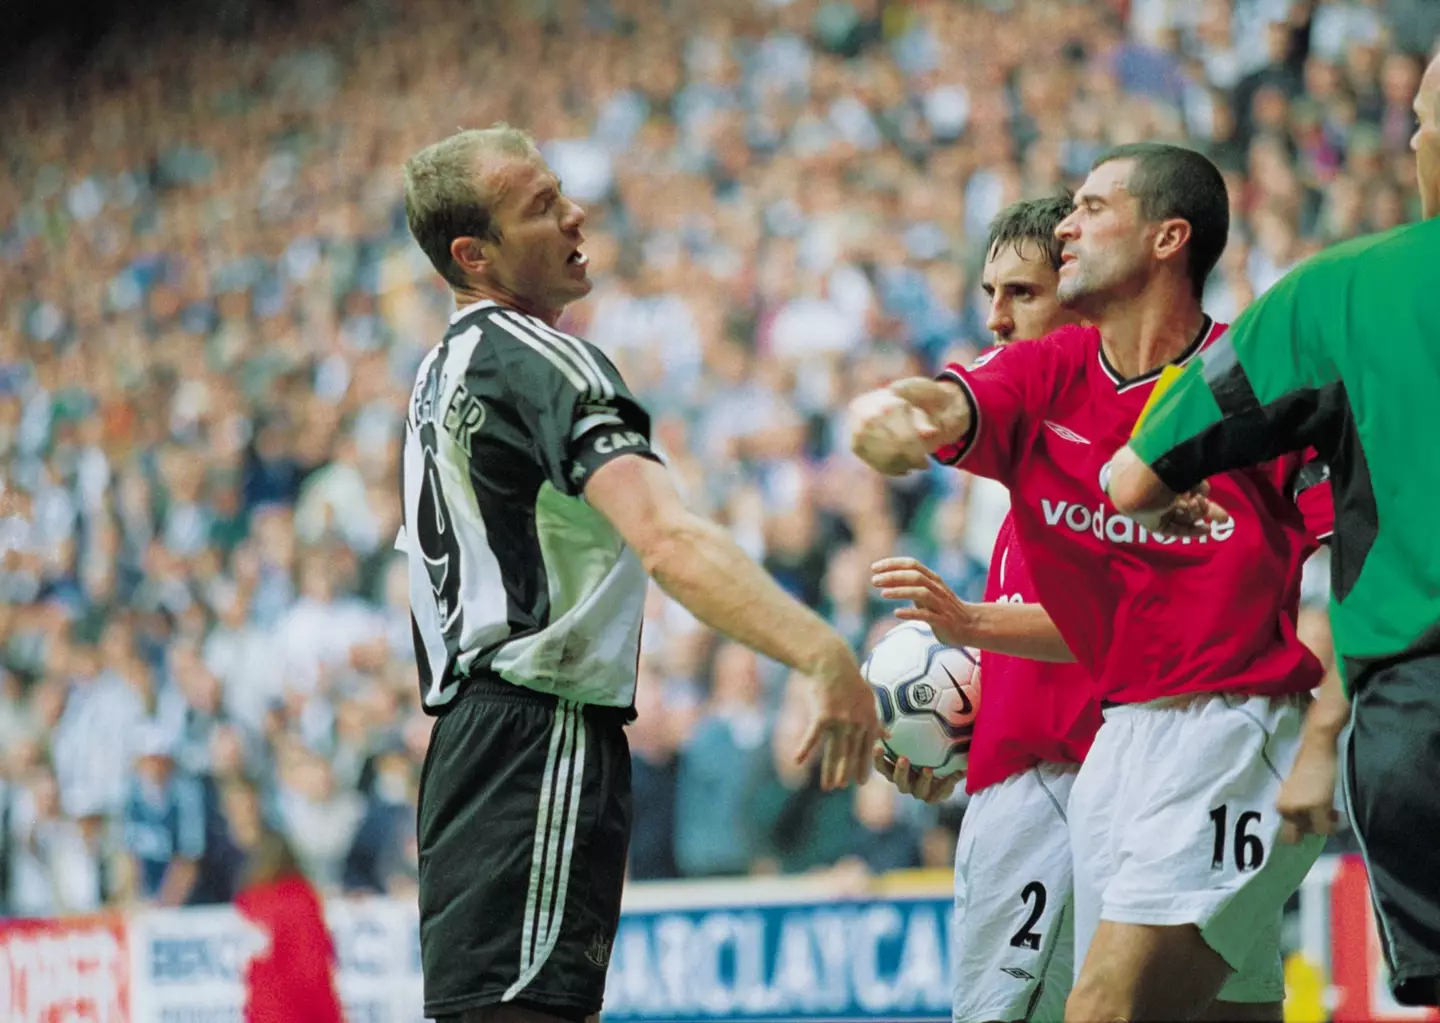 Roy Keane takes a swing at Alan Shearer as Gary Neville watches on. Image: Getty